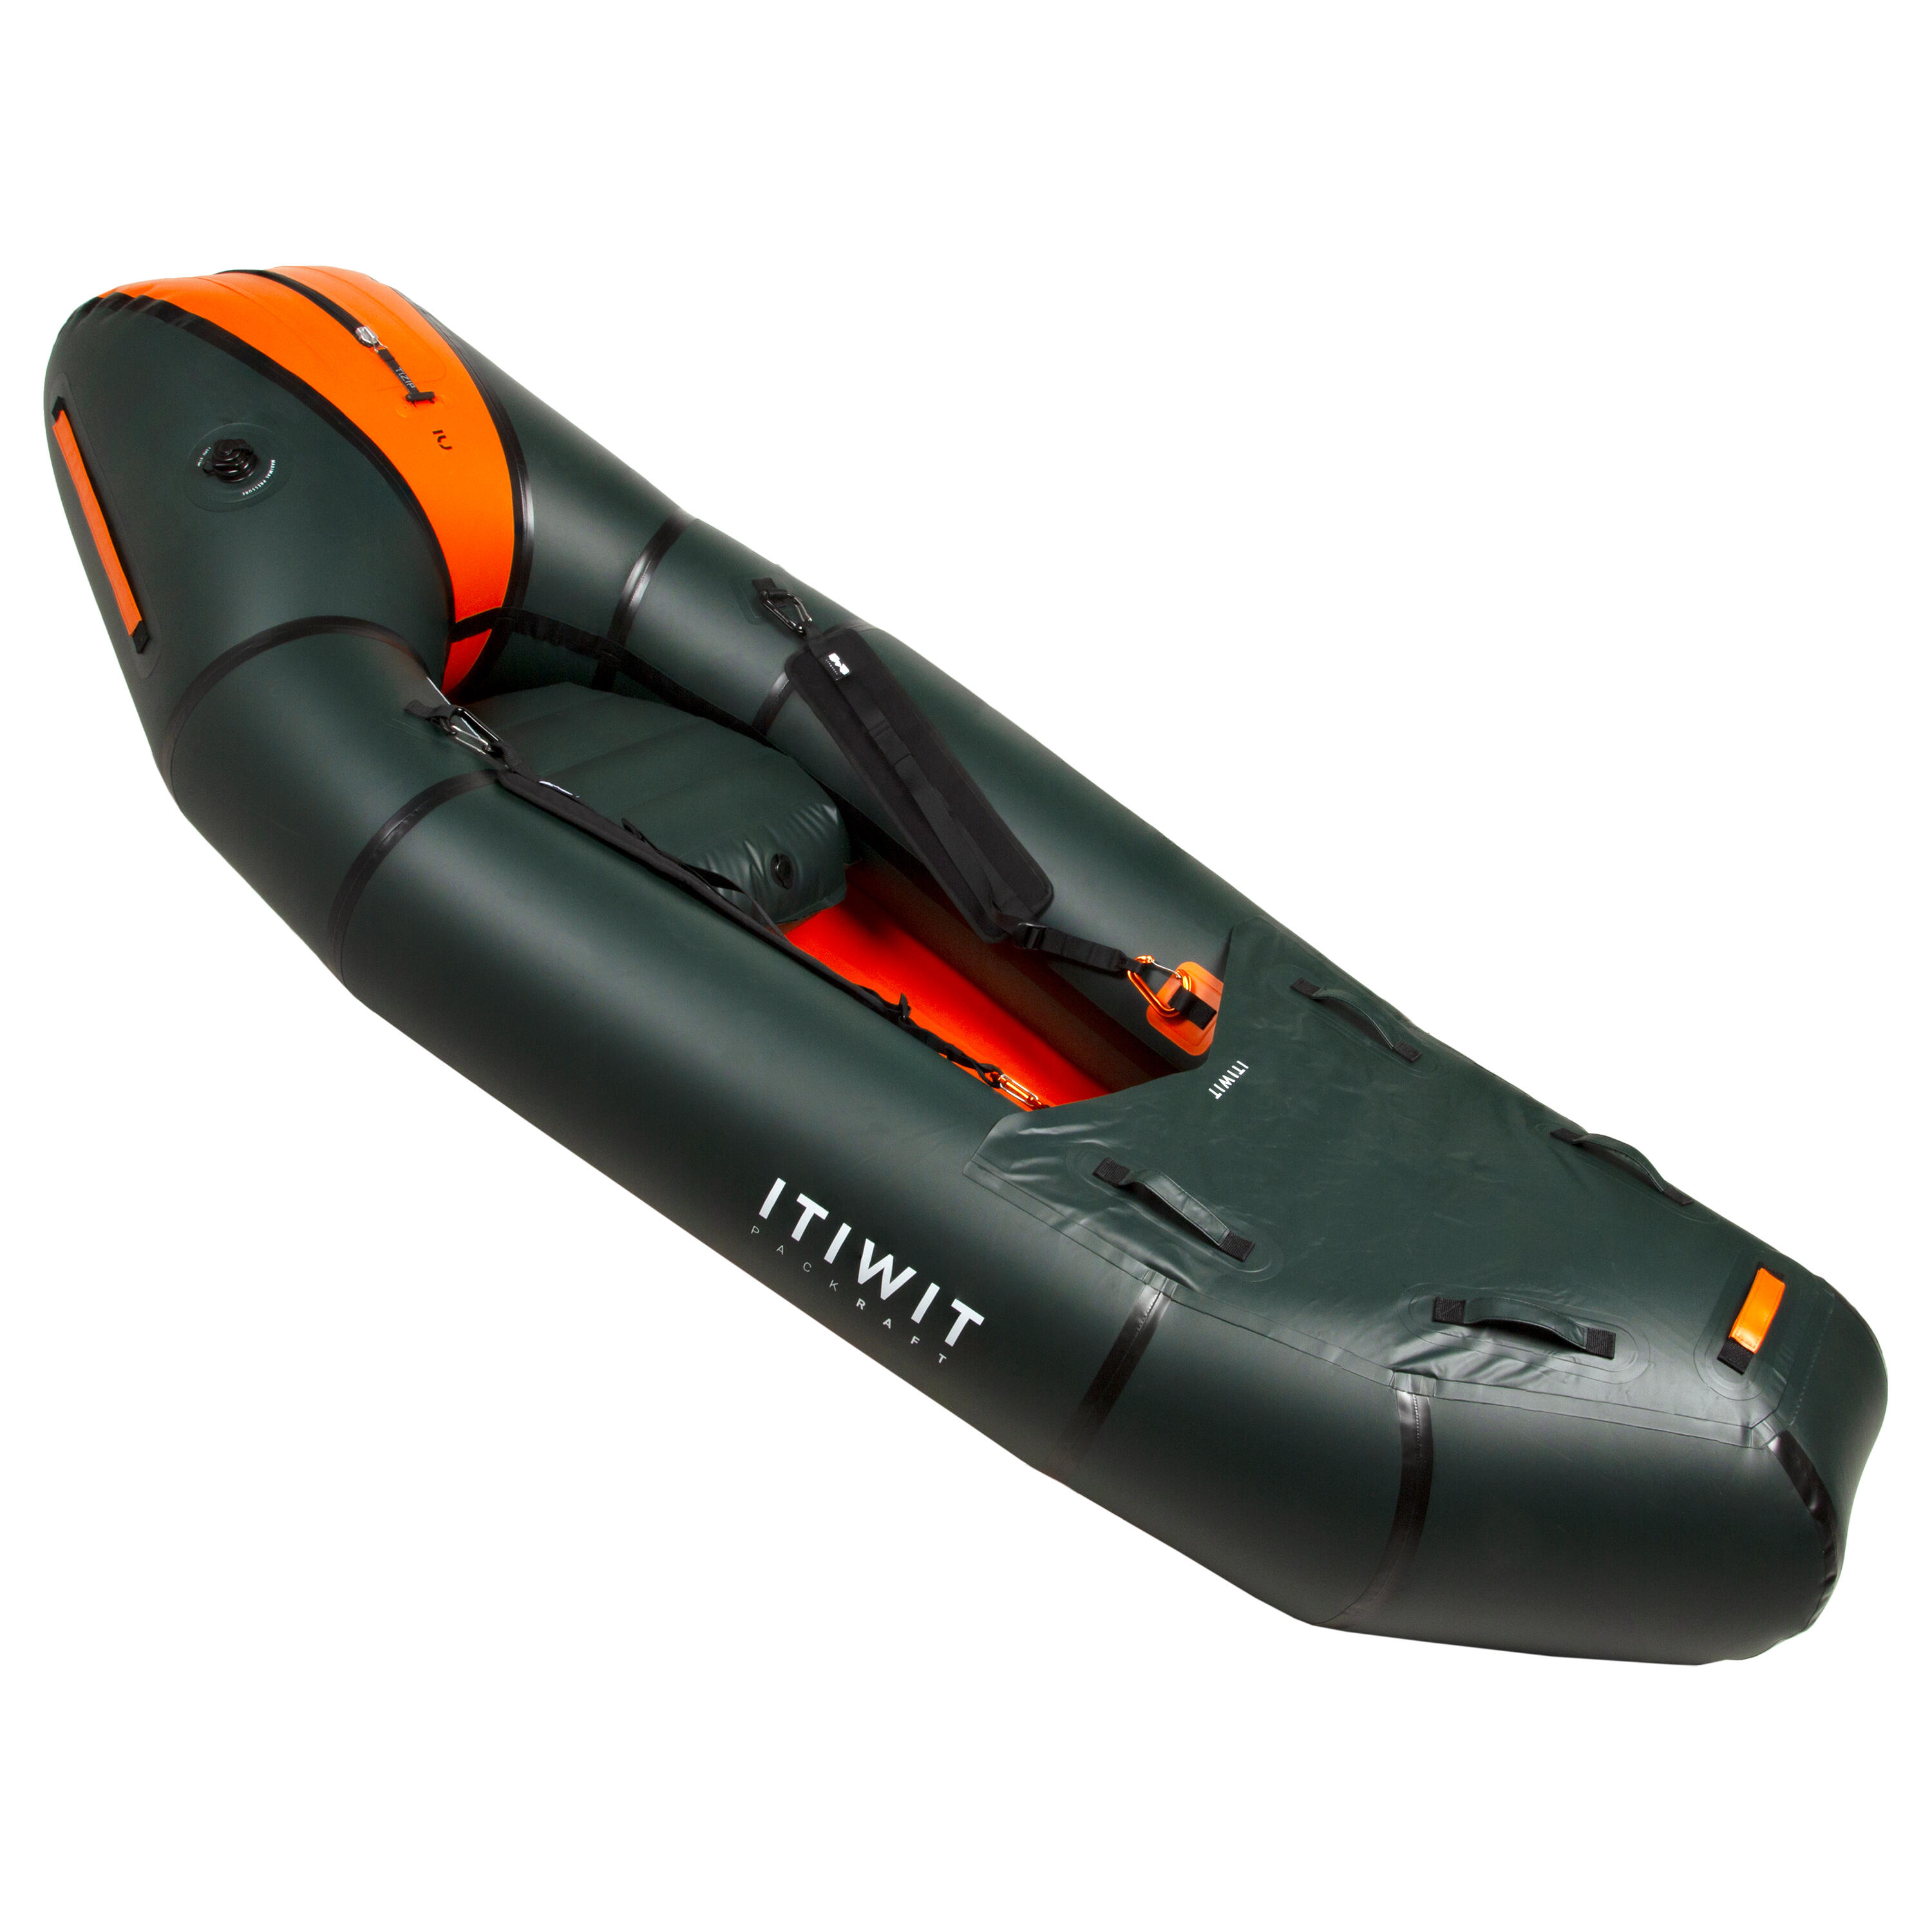 Pump bag without house for the packraft PR500 Itiwit 2/2